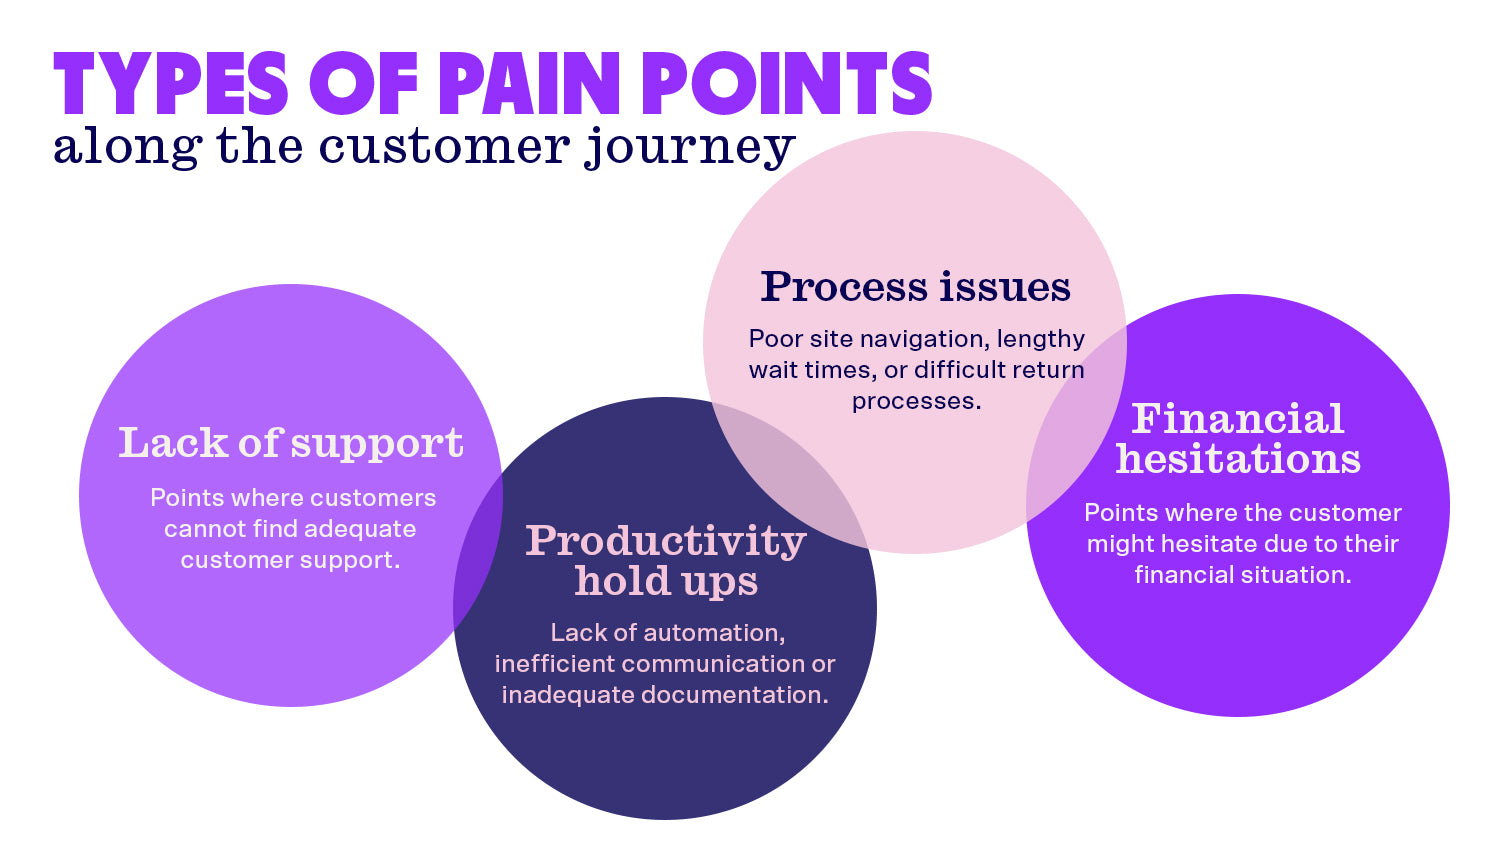 Pain points along a customer's journey to conversion could be lack of support, a hold up in productivity, processing issues or financial hesitations.